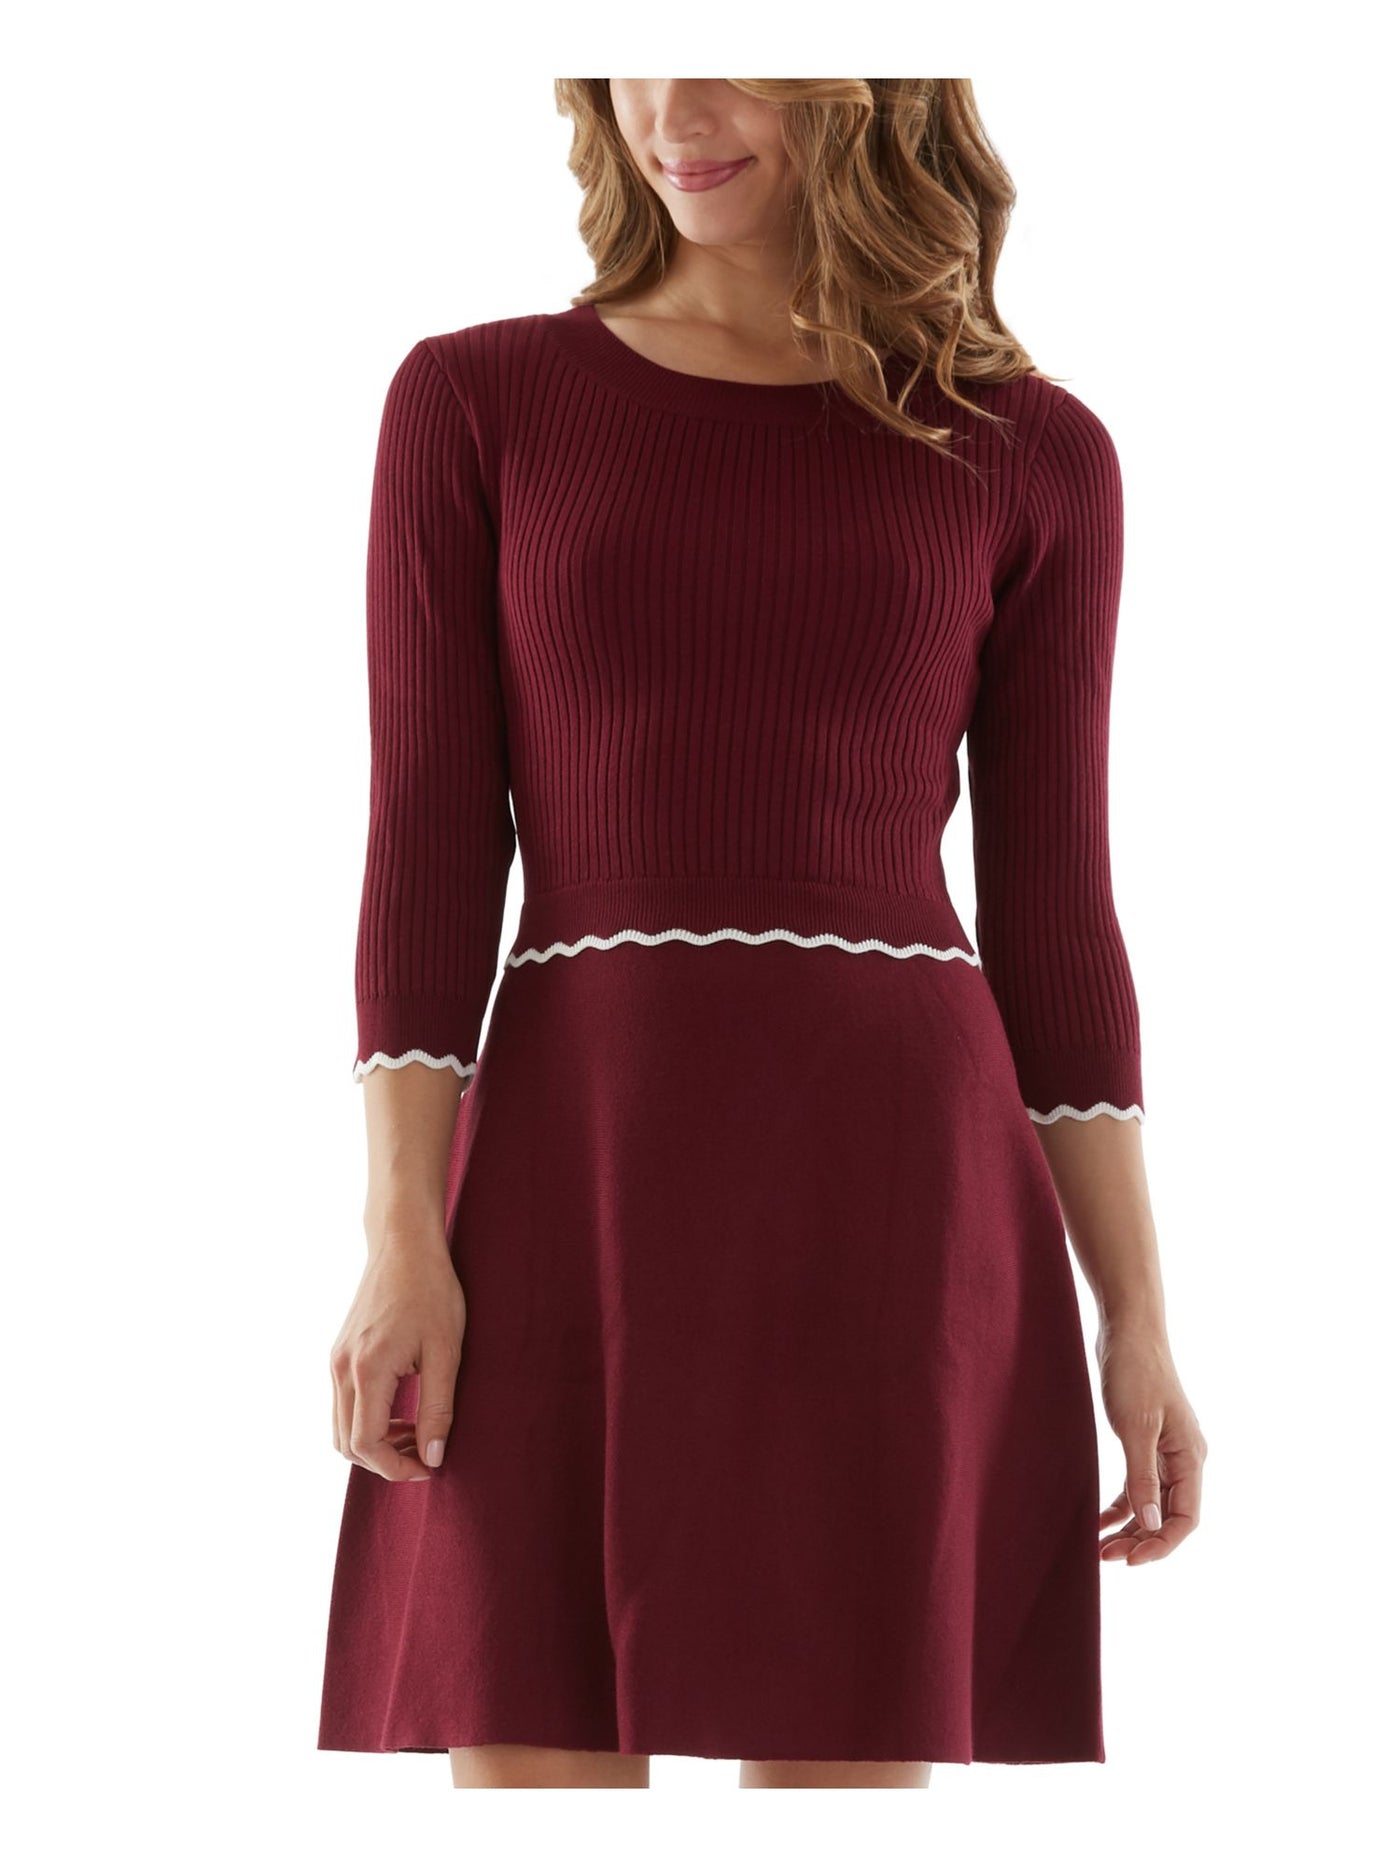 BCX DRESS Womens Maroon 3/4 Sleeve Round Neck Above The Knee Party Sweater Dress Juniors XL